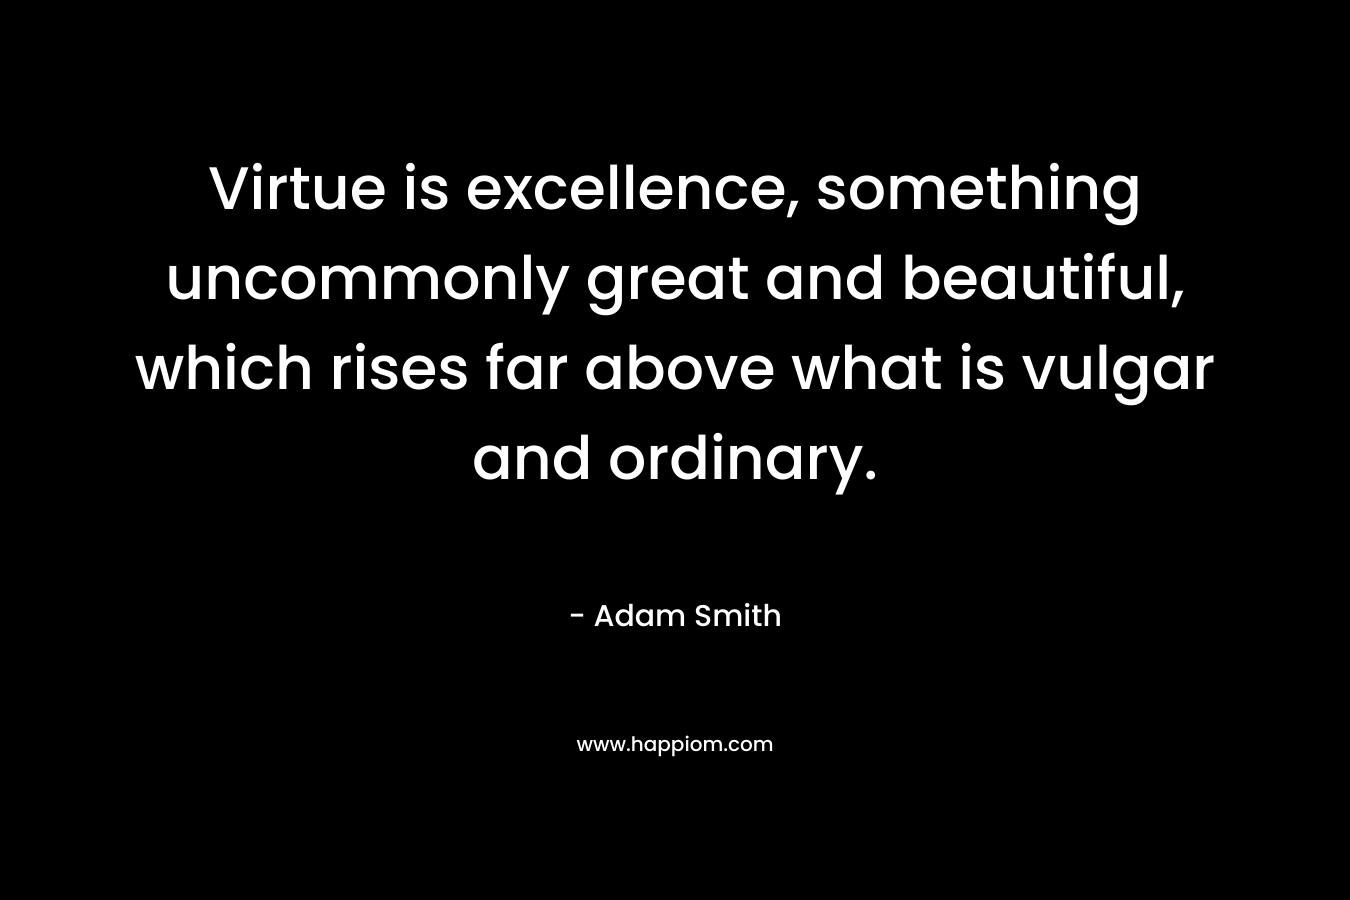 Virtue is excellence, something uncommonly great and beautiful, which rises far above what is vulgar and ordinary. – Adam Smith